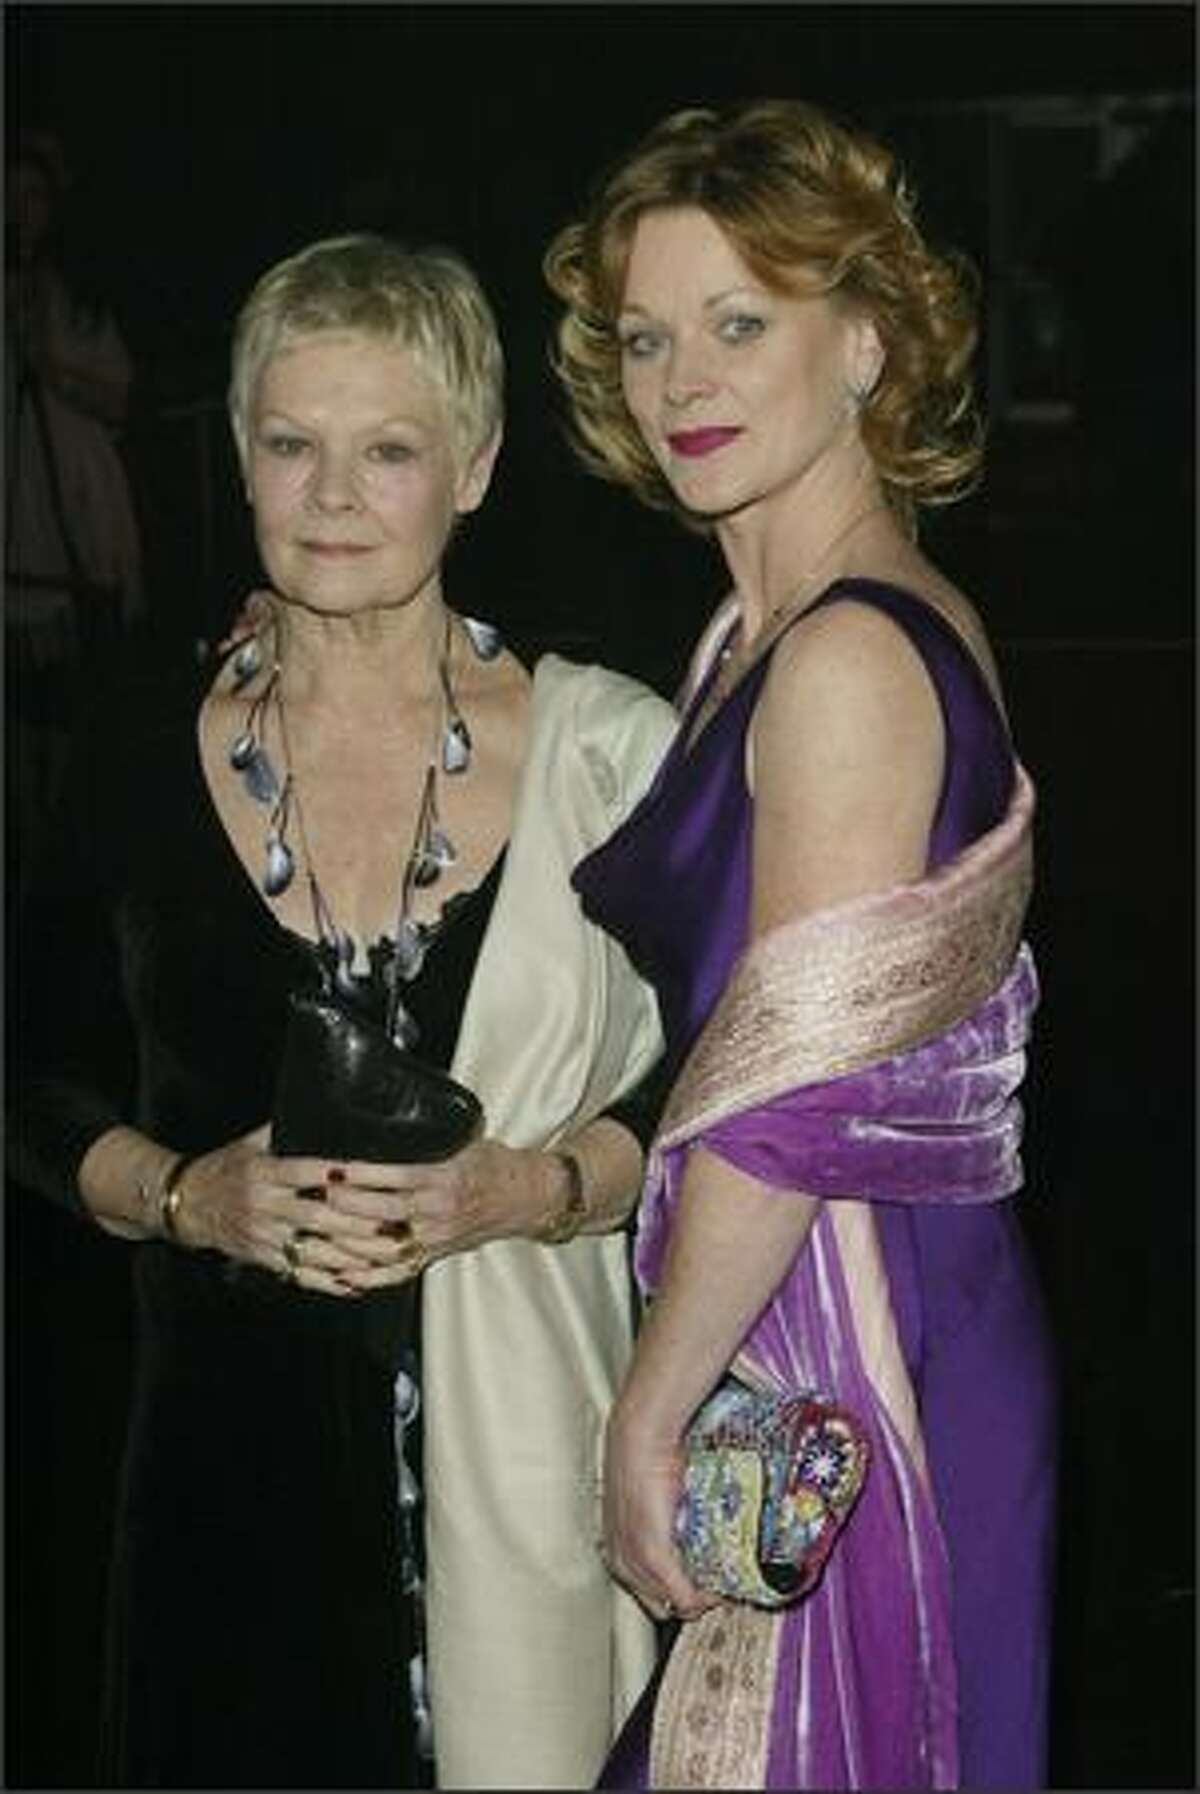 Actresses Dame Judi Dench and Samantha Bond at the after party for the World Premiere of the James Bond movie "Die Another Day" held in the "Bond Marquee" in Kensington Gardens, London, on November 18, 2002. Judi plays the role of "M" and Samantha plays "Miss Moneypenny" in the movie. (Getty Images)